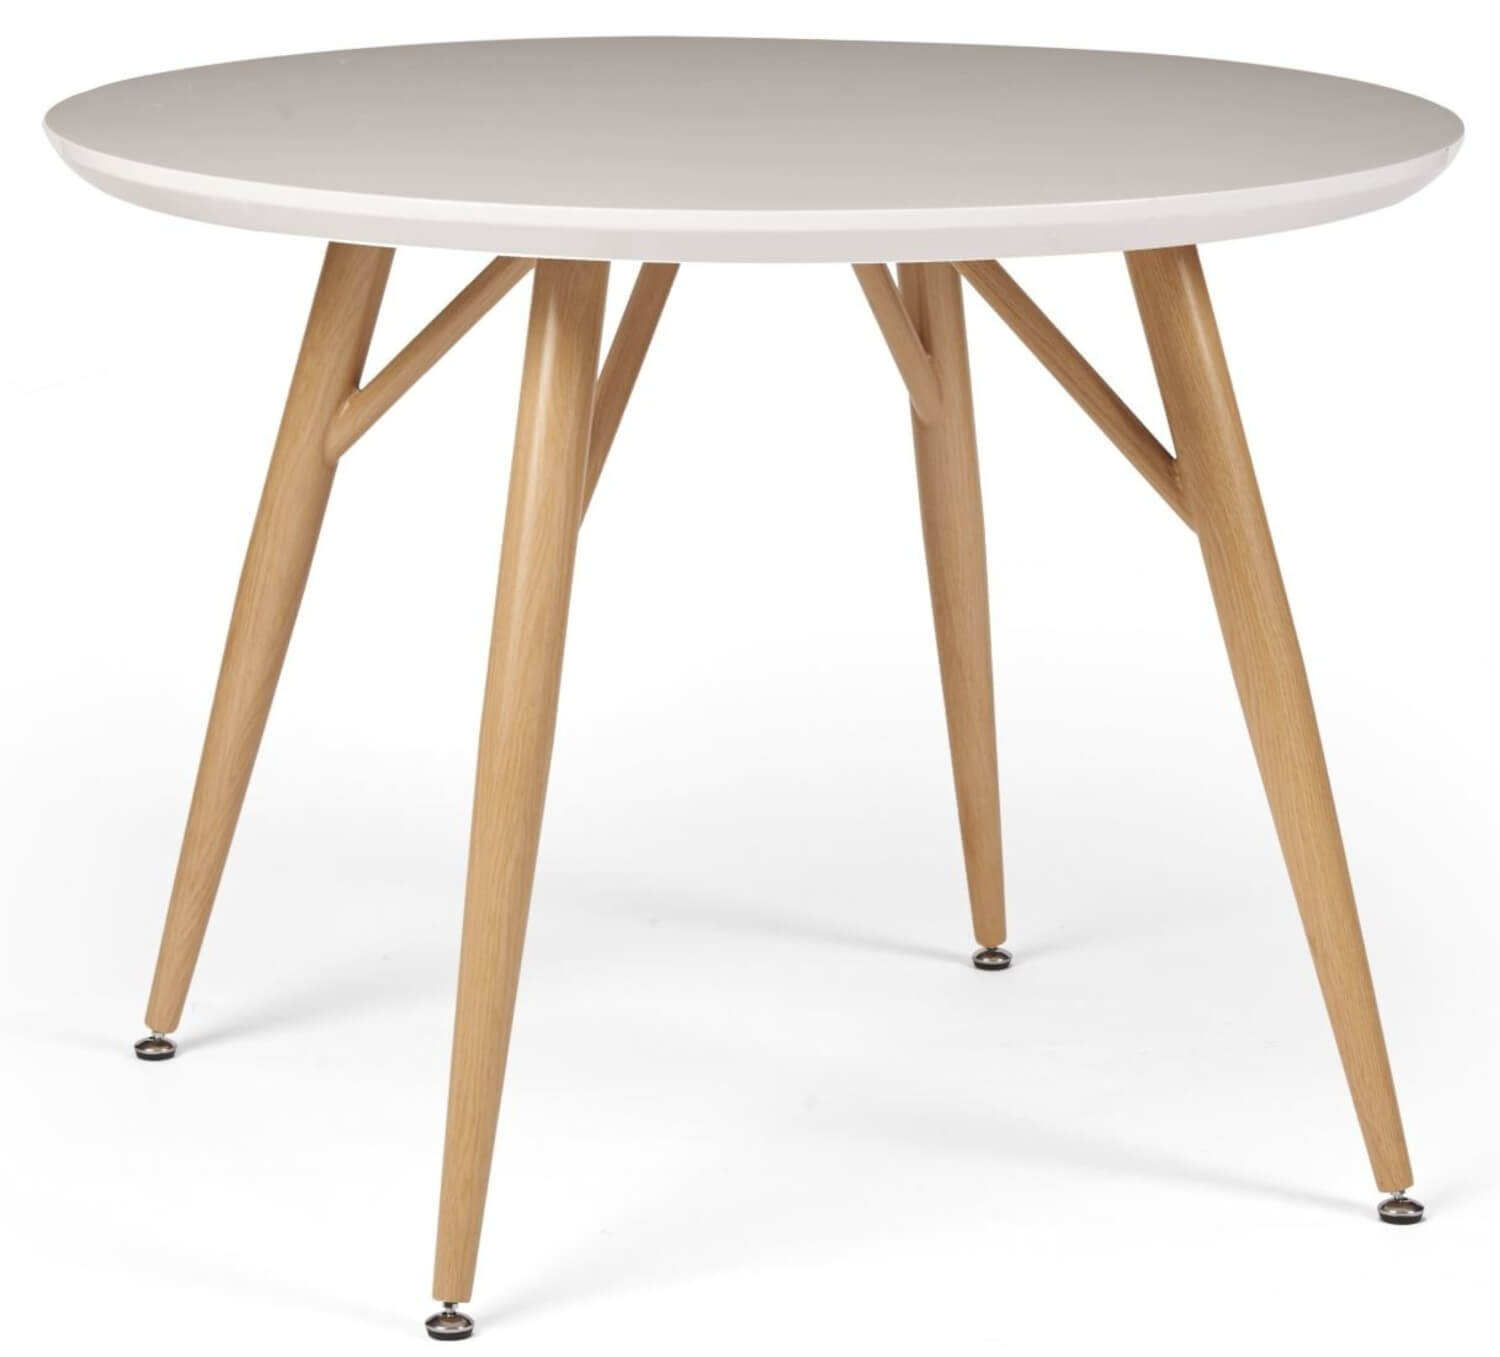 Showing image for Erica dining table